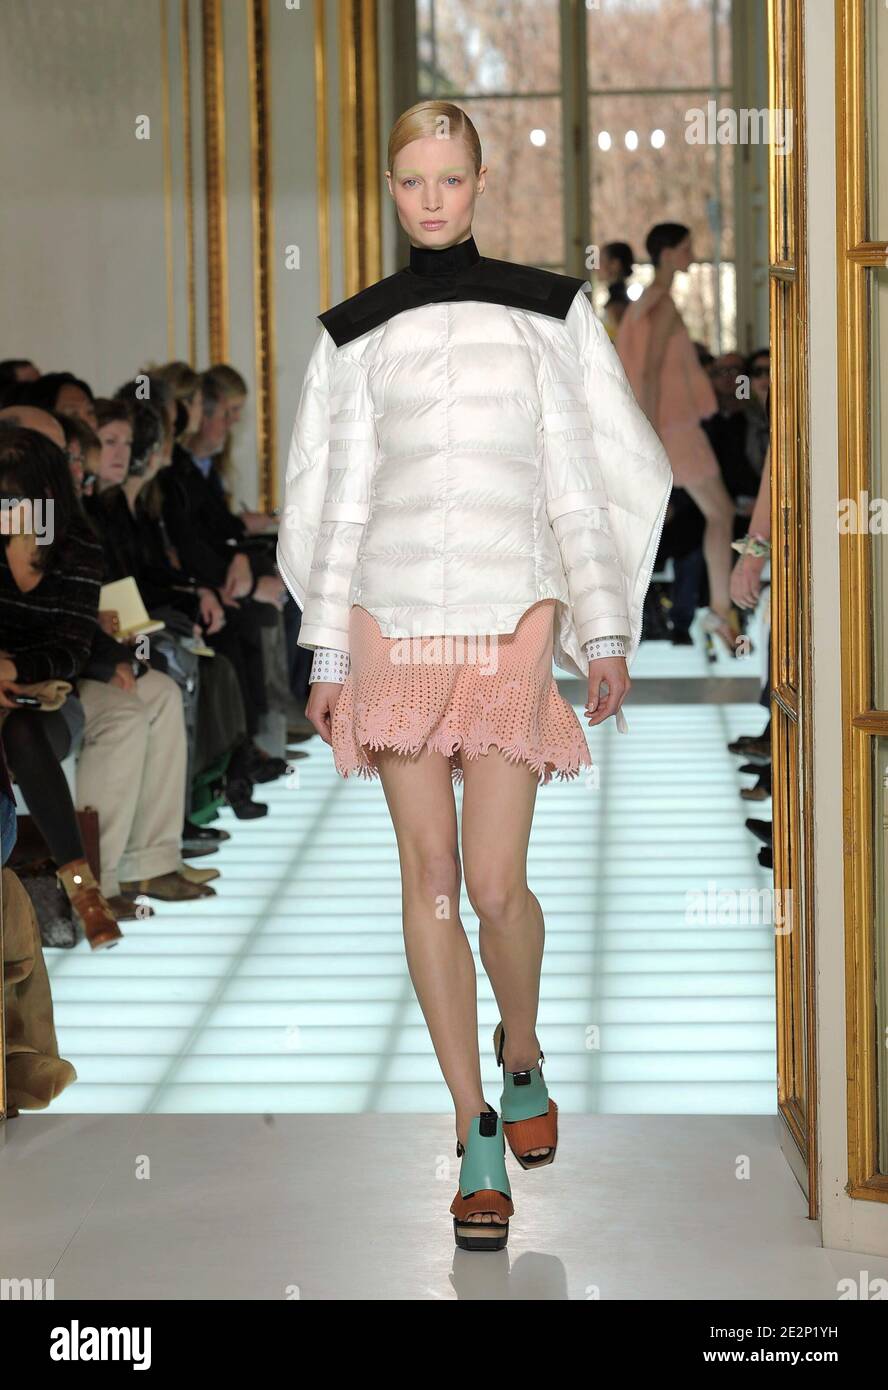 Resignation reparere parade Model Melissa Tammerijn displays a creation for Balenciaga Fall-Winter 2010/ 2011 ready-to-wear collection show held at the Hotel Crillon in Paris,  France on March 4, 2010. Photo by Alain Gil-Gonzalez/ABACAPRESS.COM Stock  Photo -